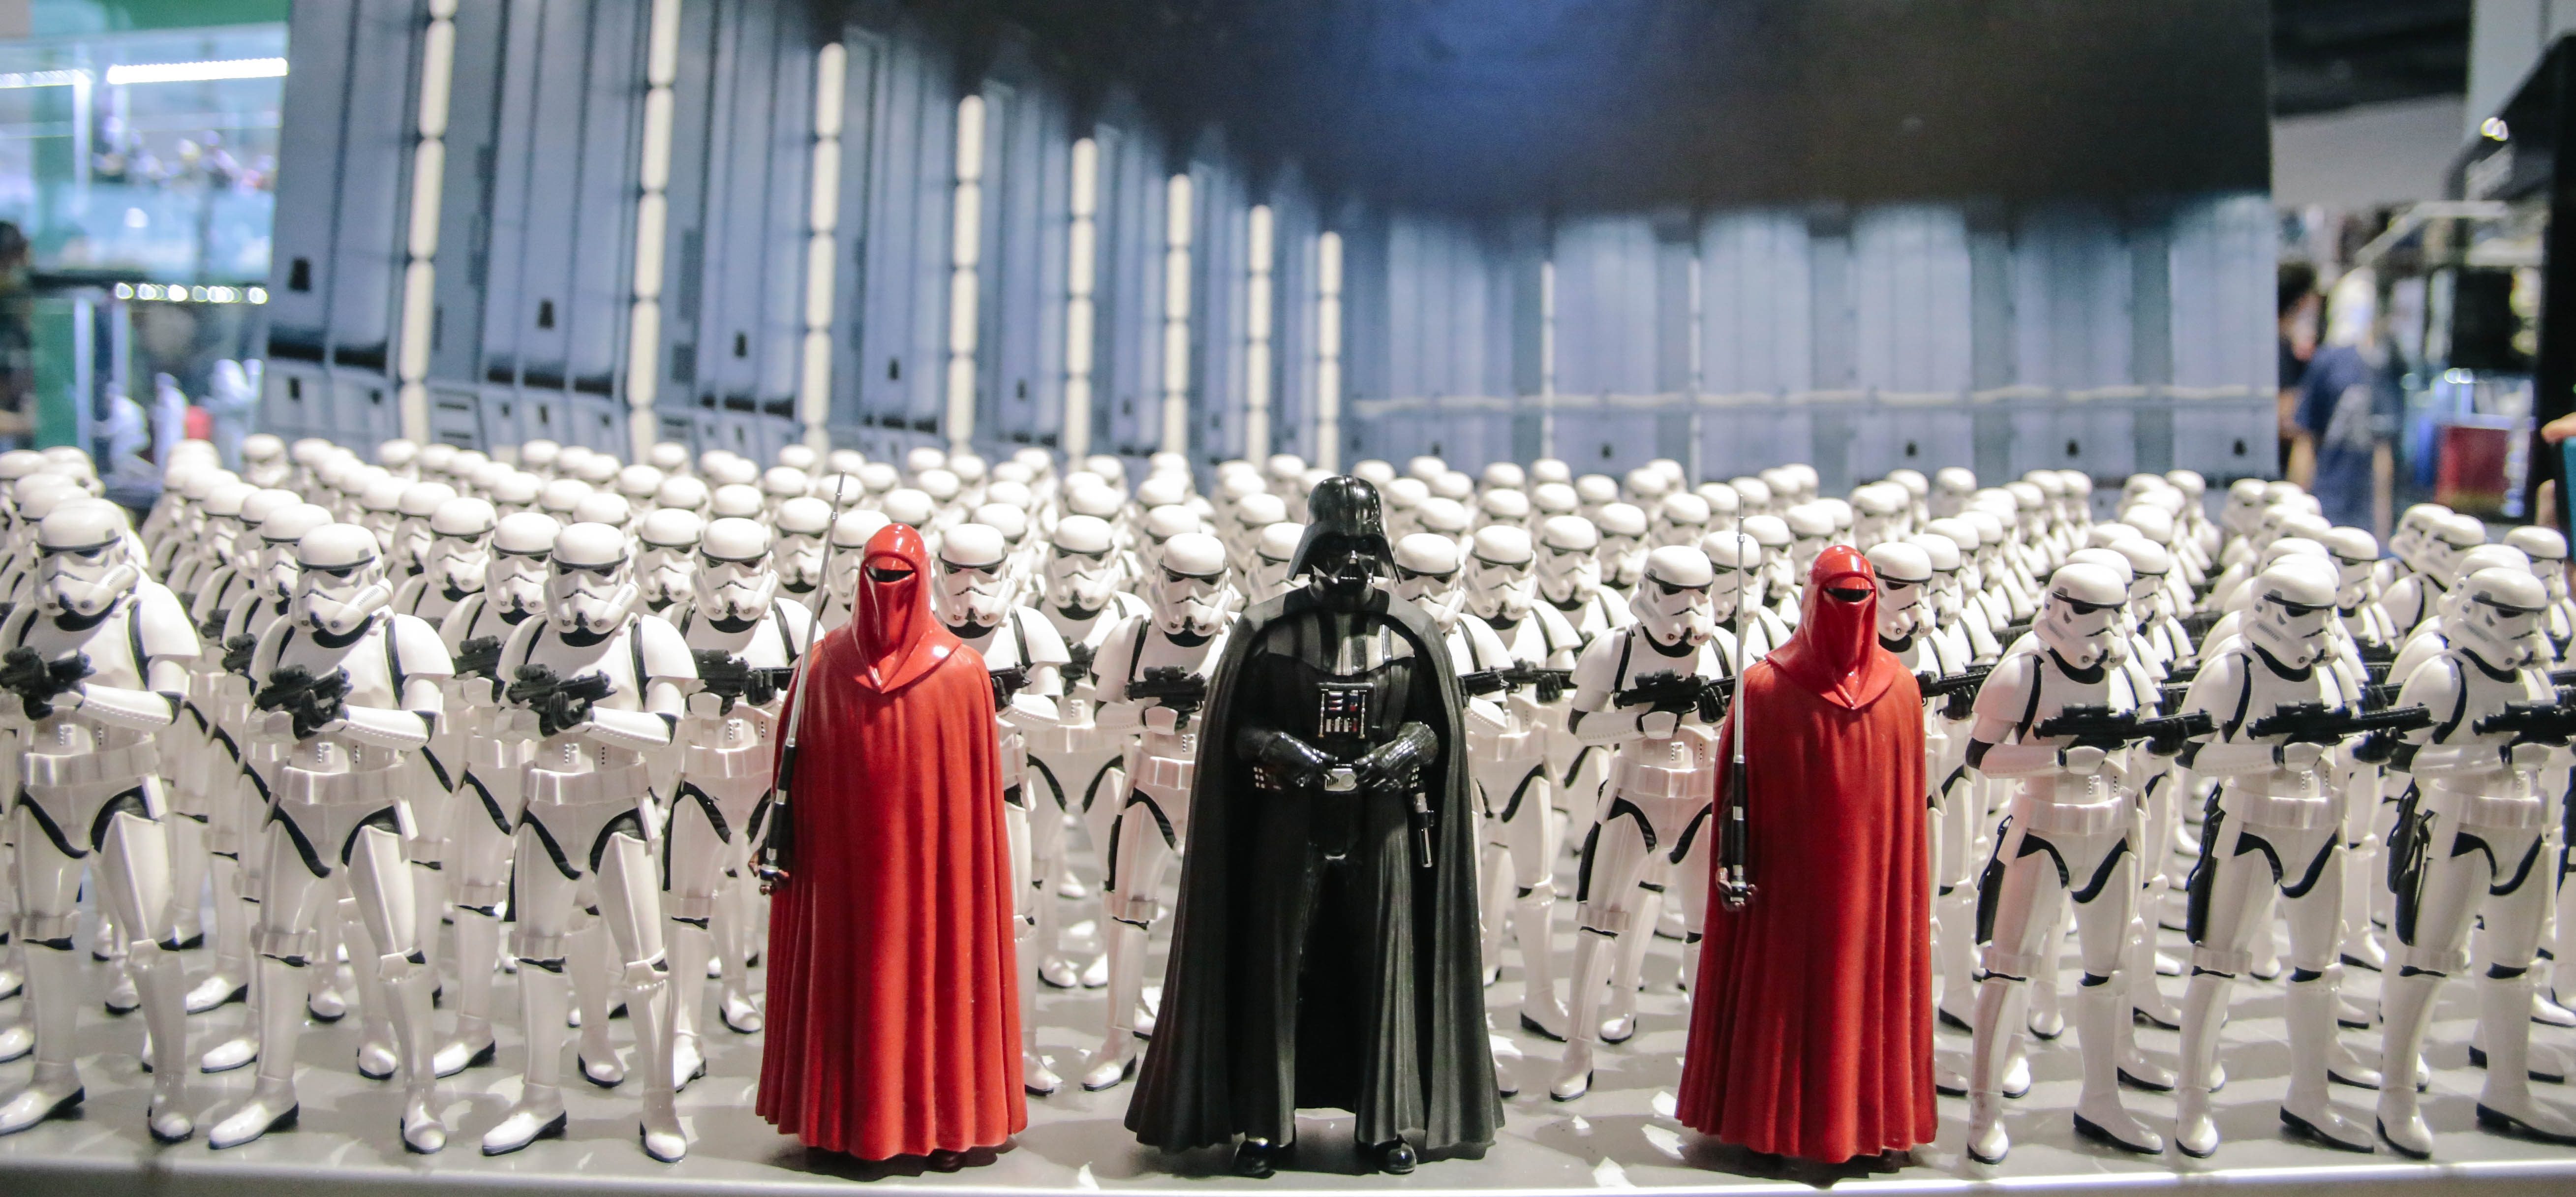 Darth Vader, Imperial Guards, and Stormtroopers. Photo by Paolo Abad/Rappler  